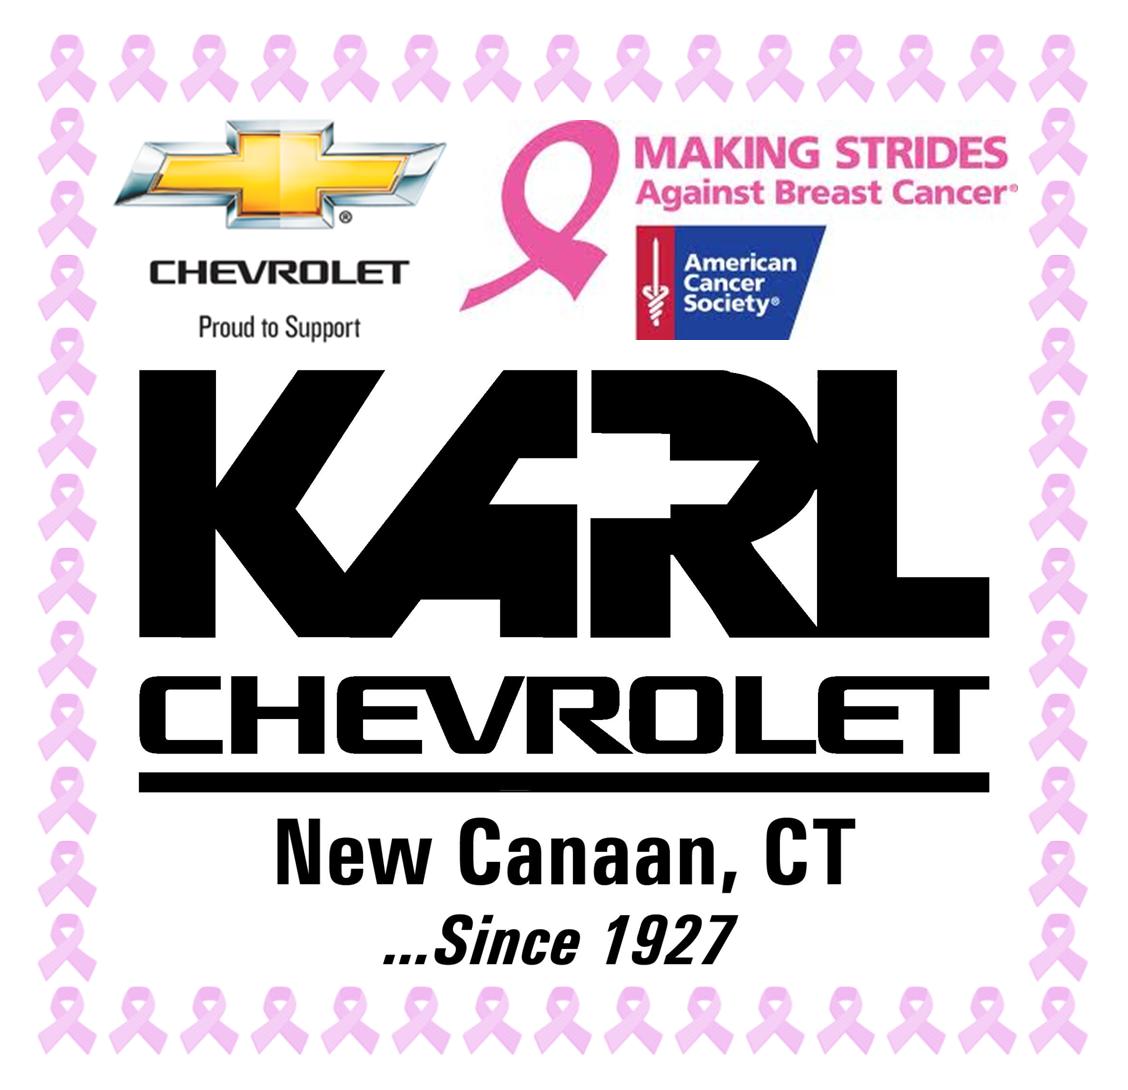 Karl Chevrolet Donates $20 per test drive in October to support American Cancer Society Making Strides Against Breast Cancer